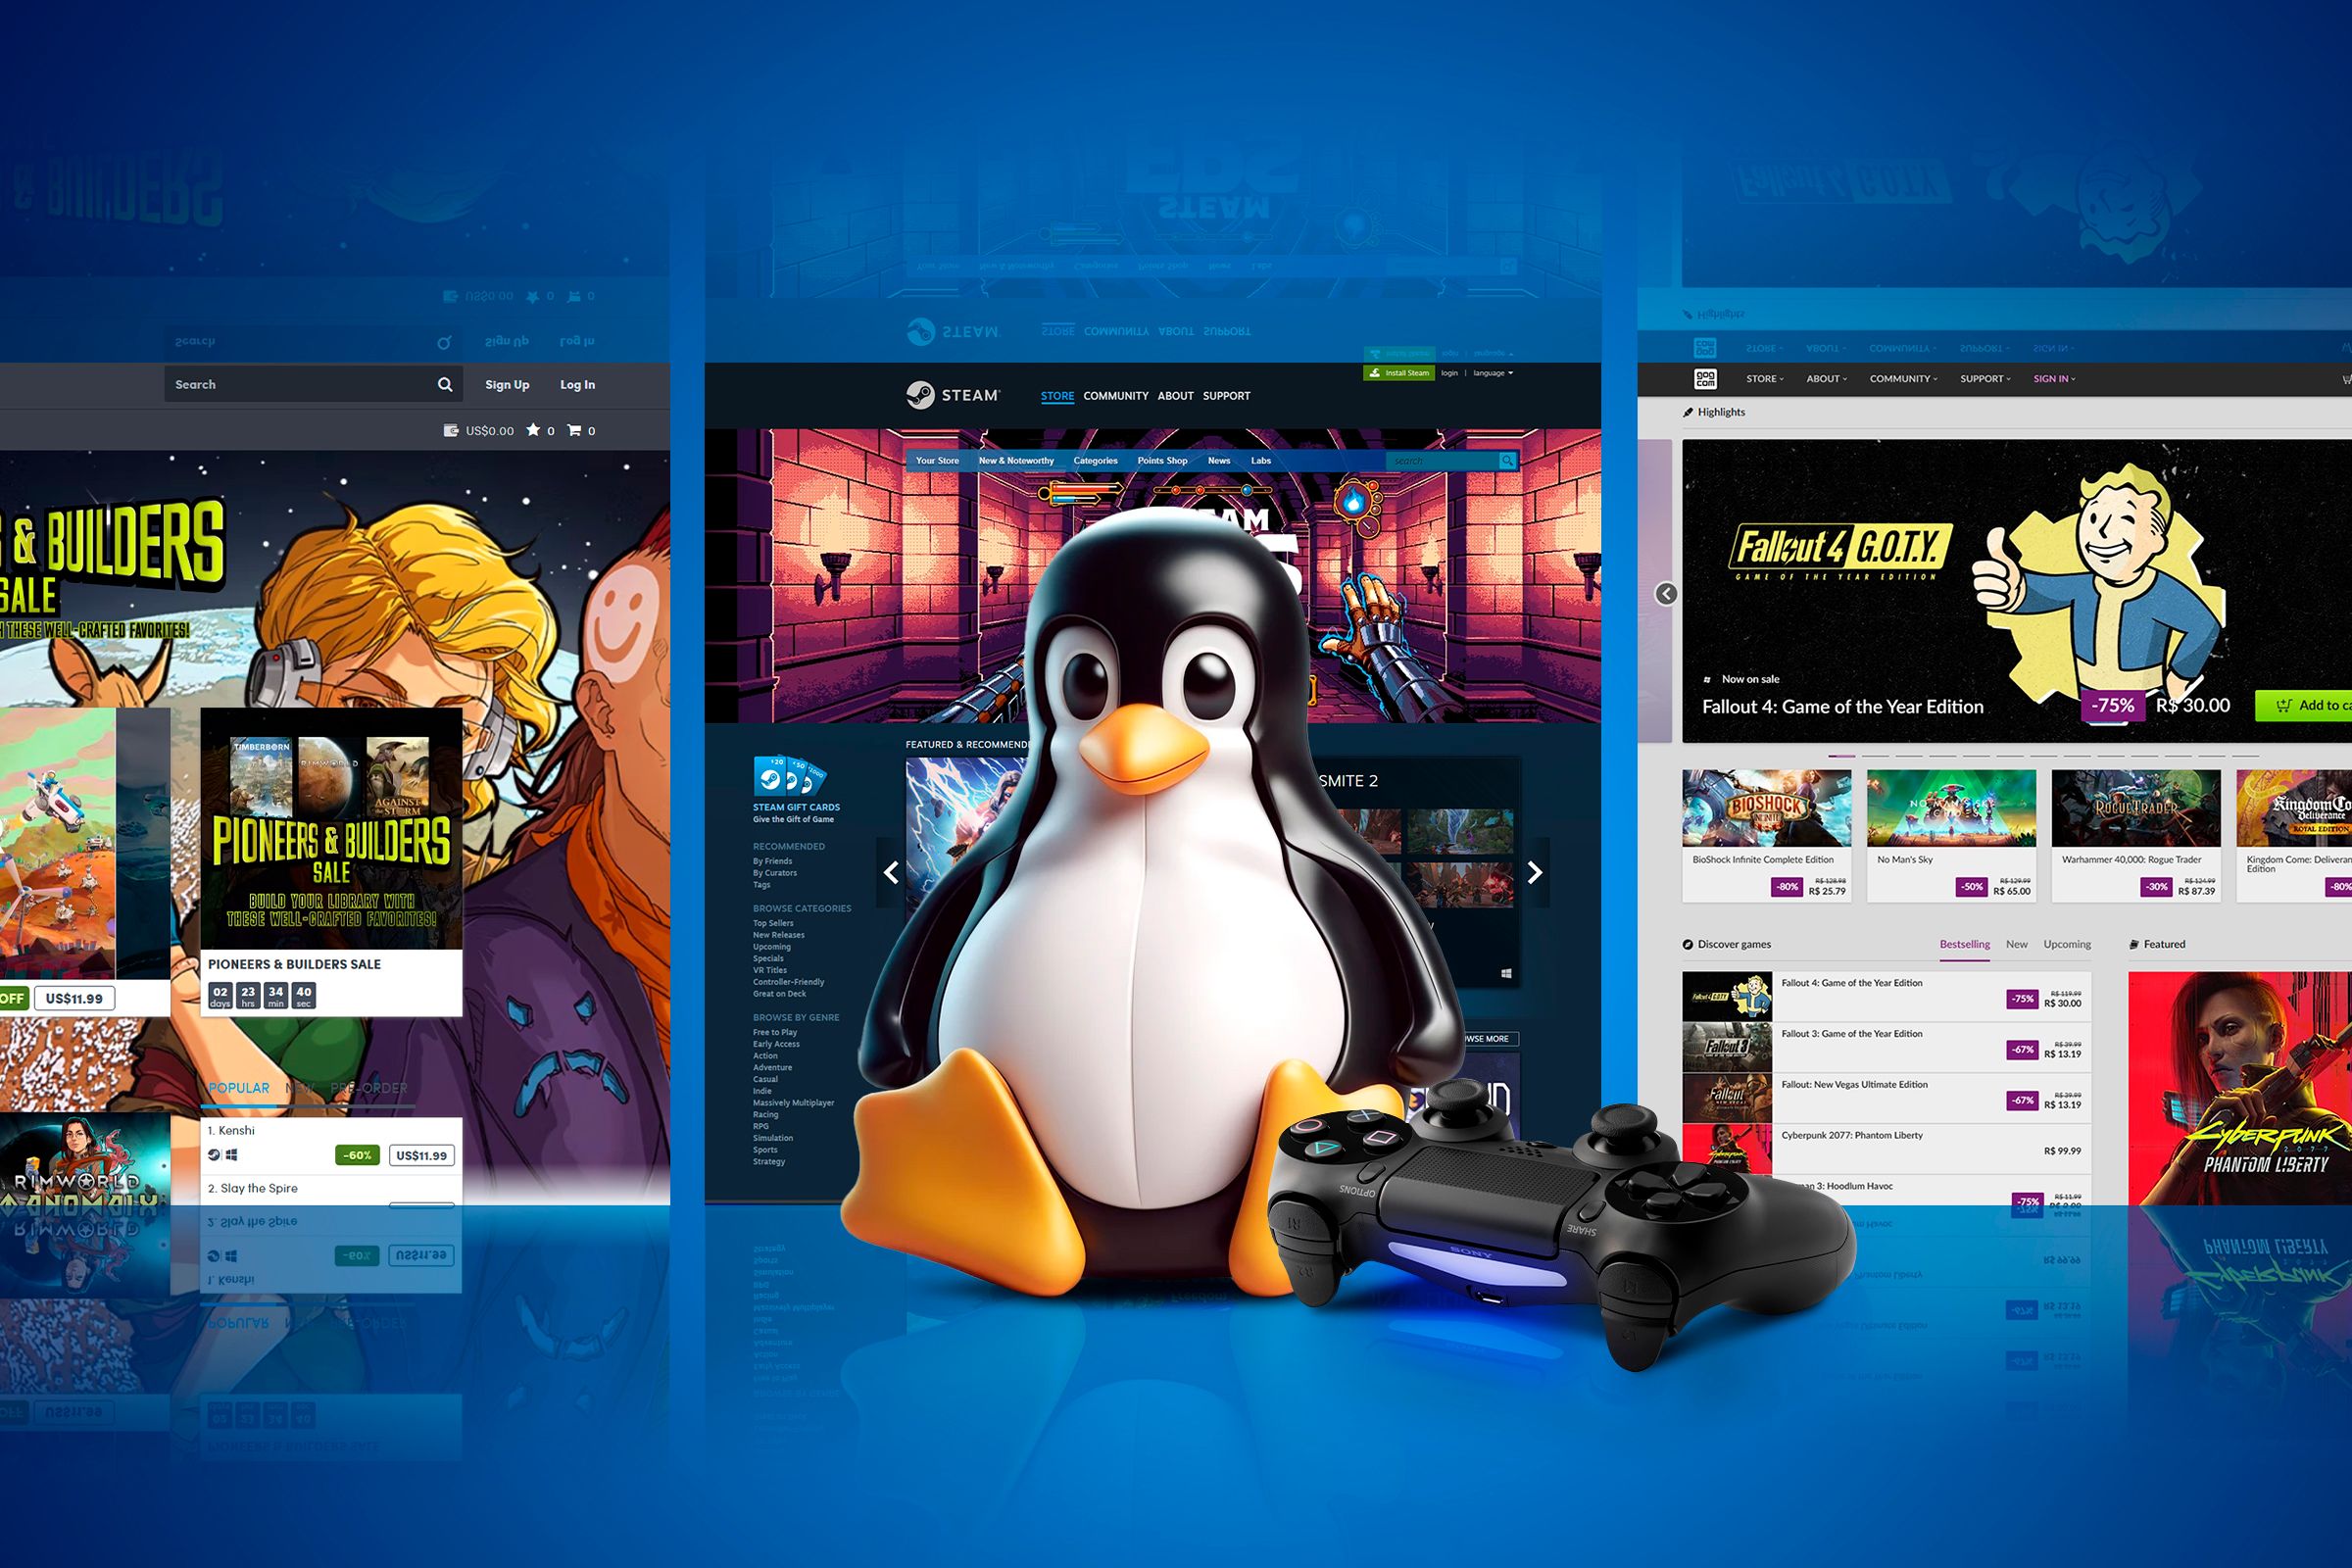 Tux, the Linux mascot, with a gamepad on the right side and some screens in the background.